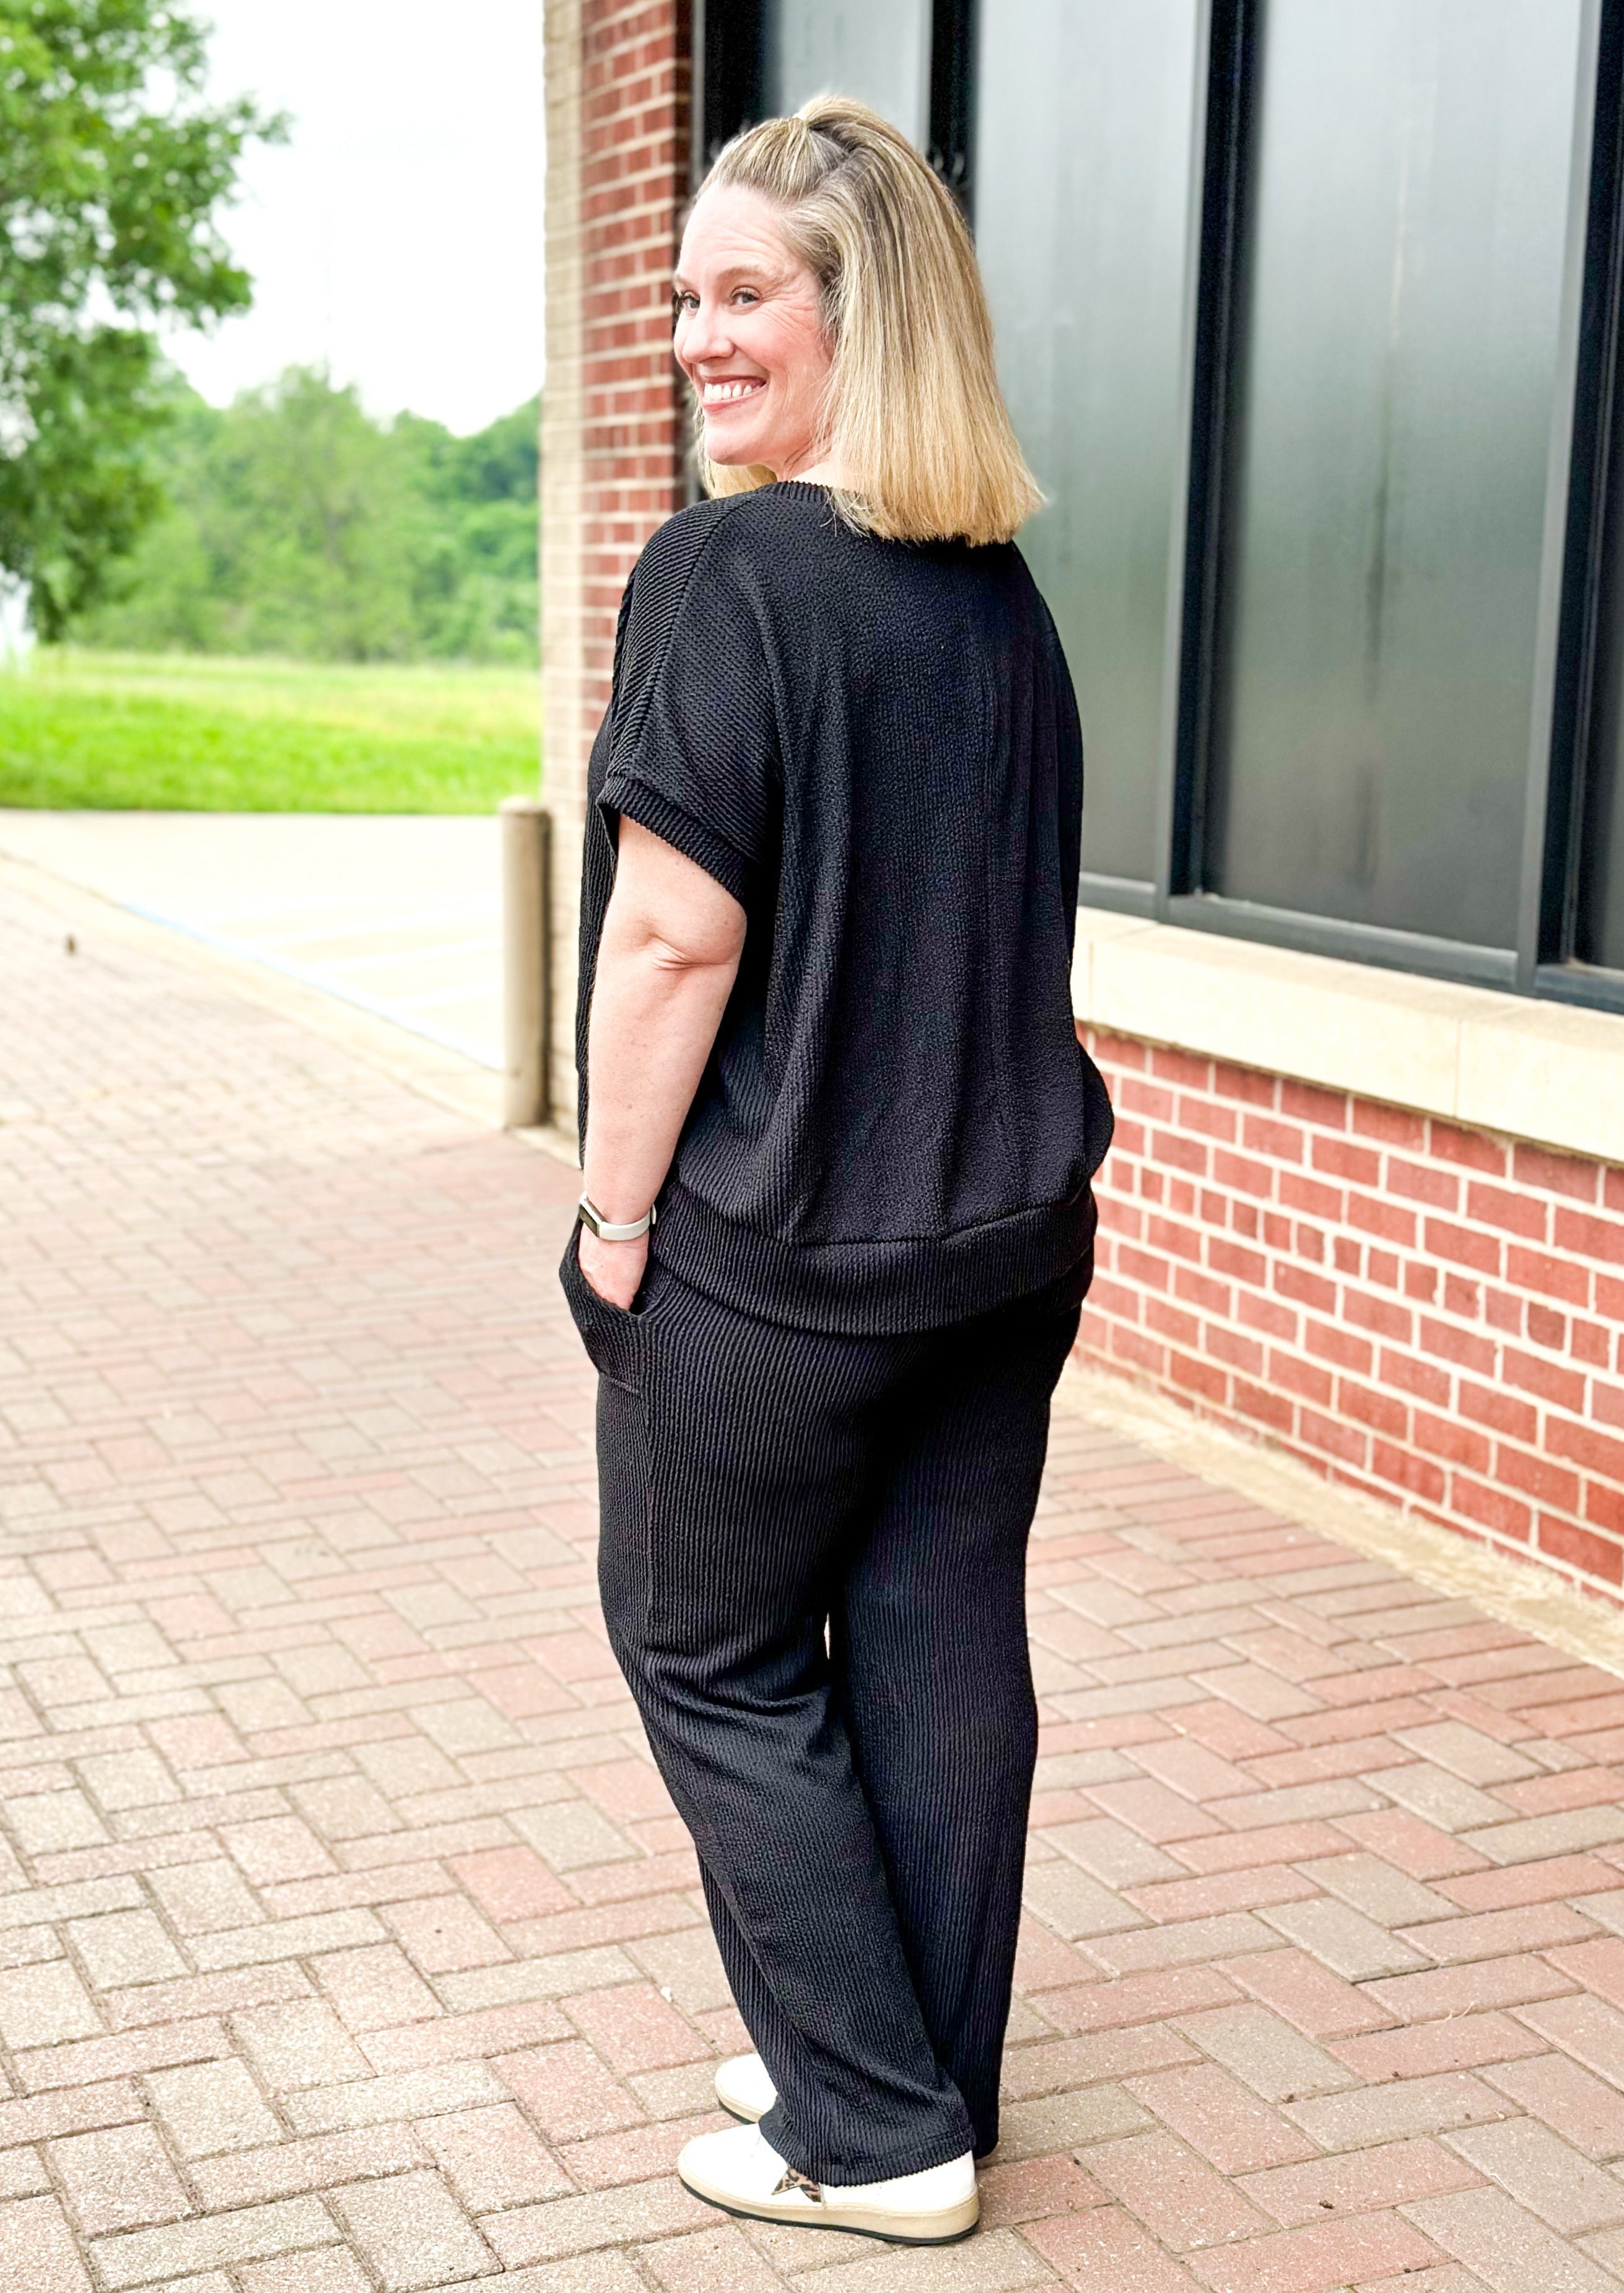 textured black set top and pants - pants have pockets and banded waist - top has a drop shoulder dolman sleeve with banding around the bottom.